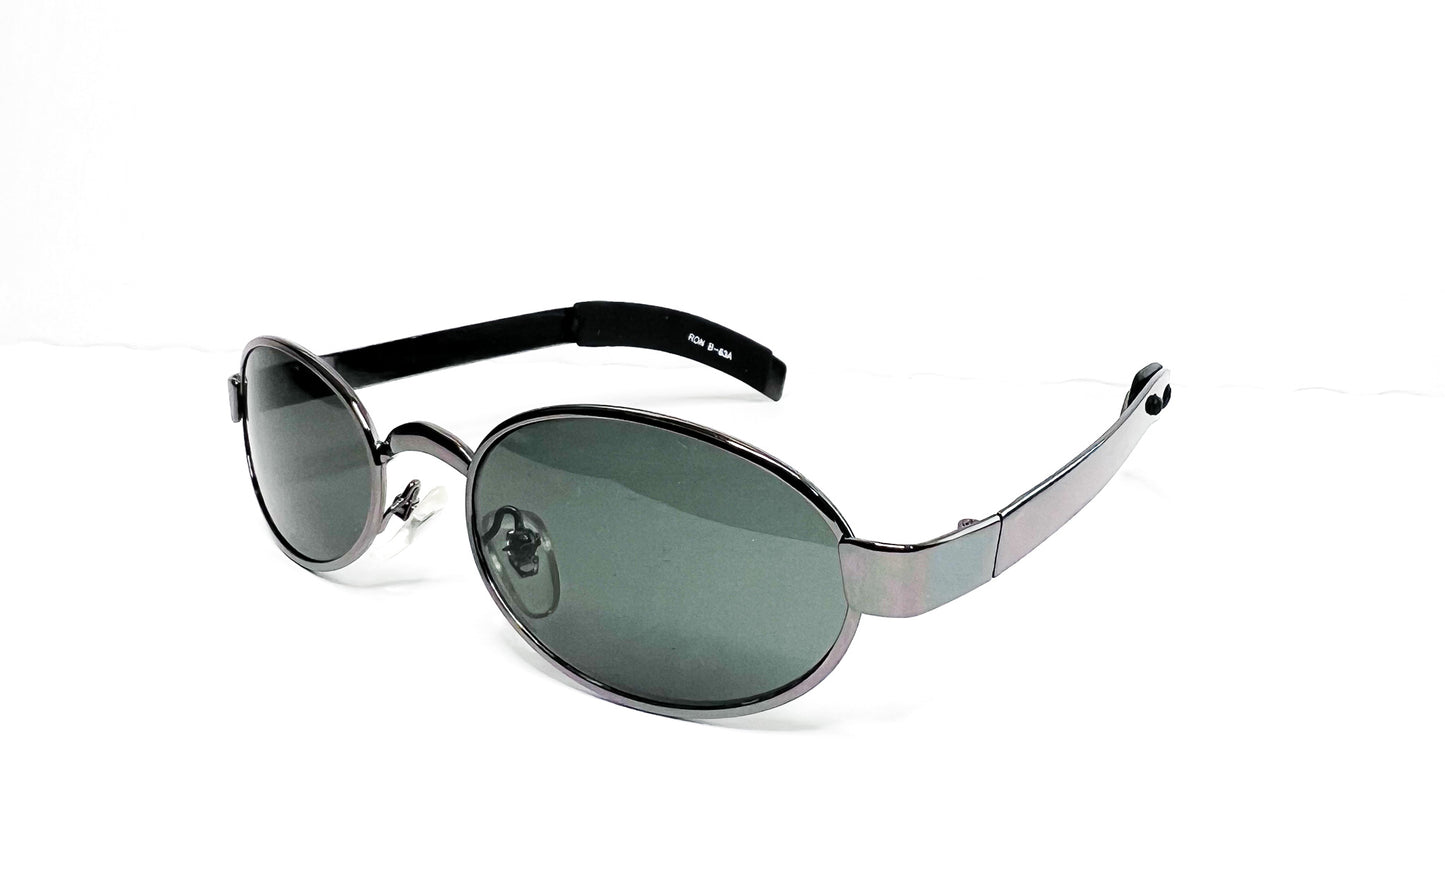 SX Oval 90's retro lenses with silver details sunglasses